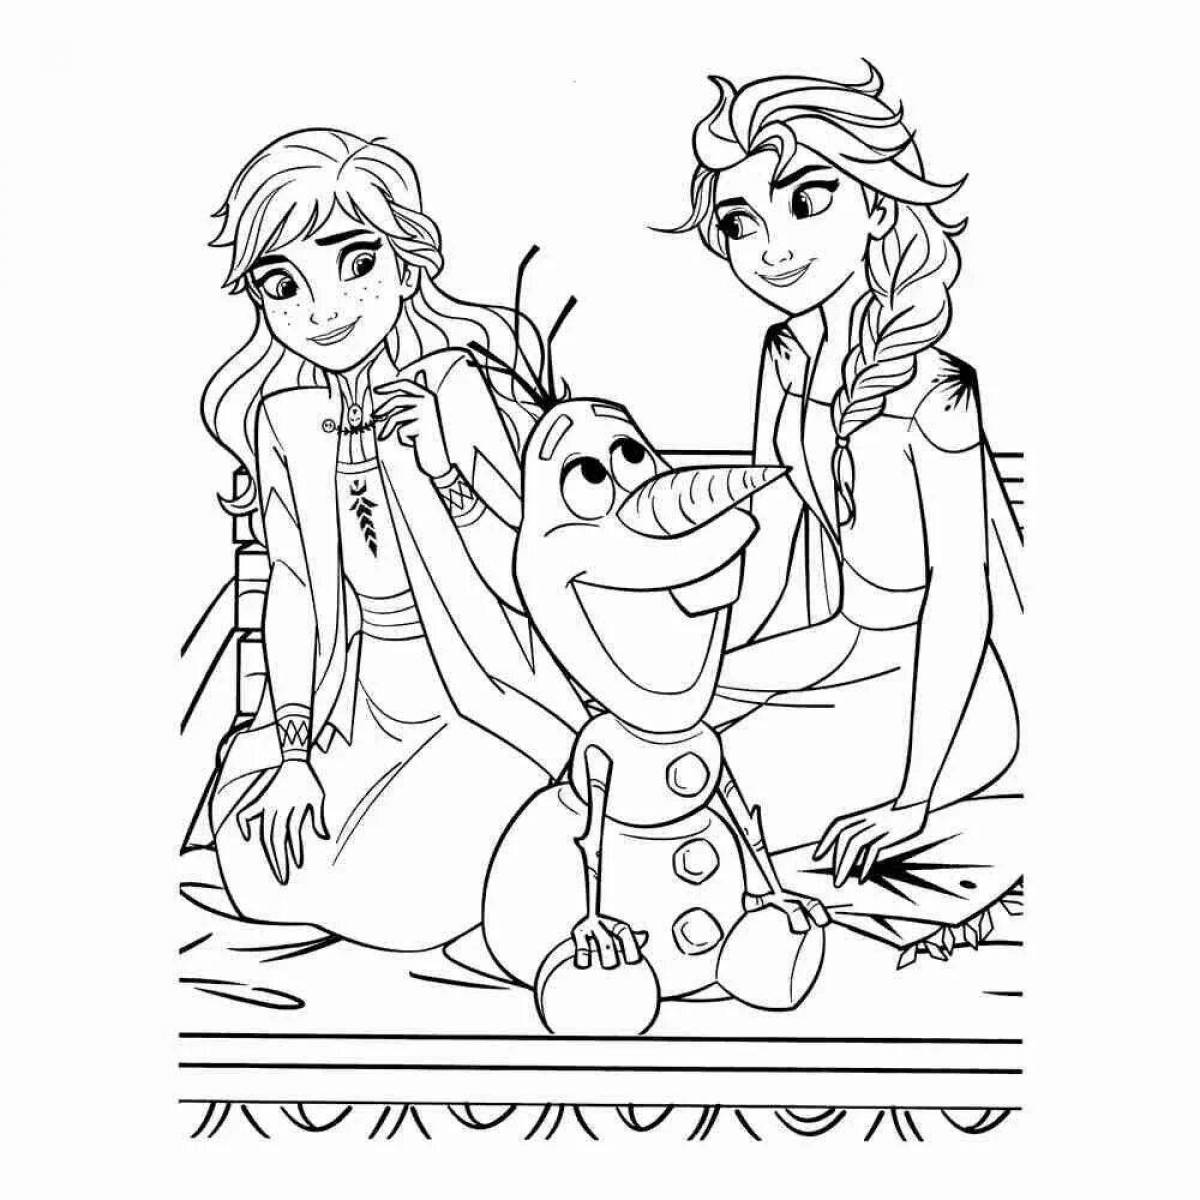 Bright anna and olaf coloring